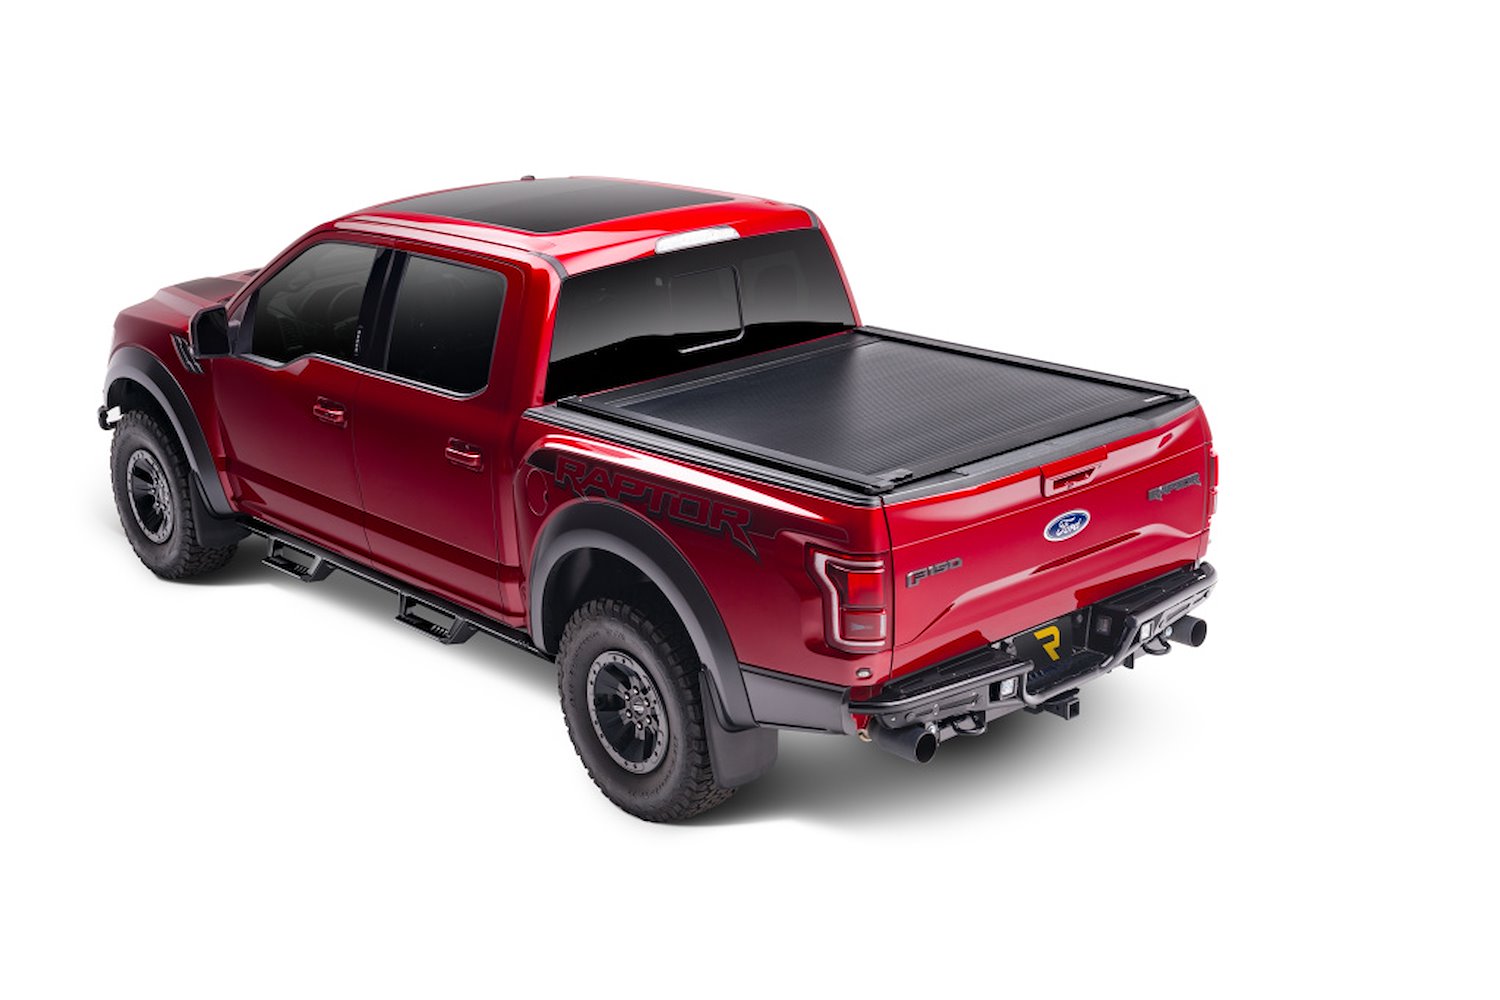 T-60231 RetraxOne XR Retractable Tonneau Cover Fits Select Dodge/Ram 5' 7" Bed without RamBox without Stake Pockets